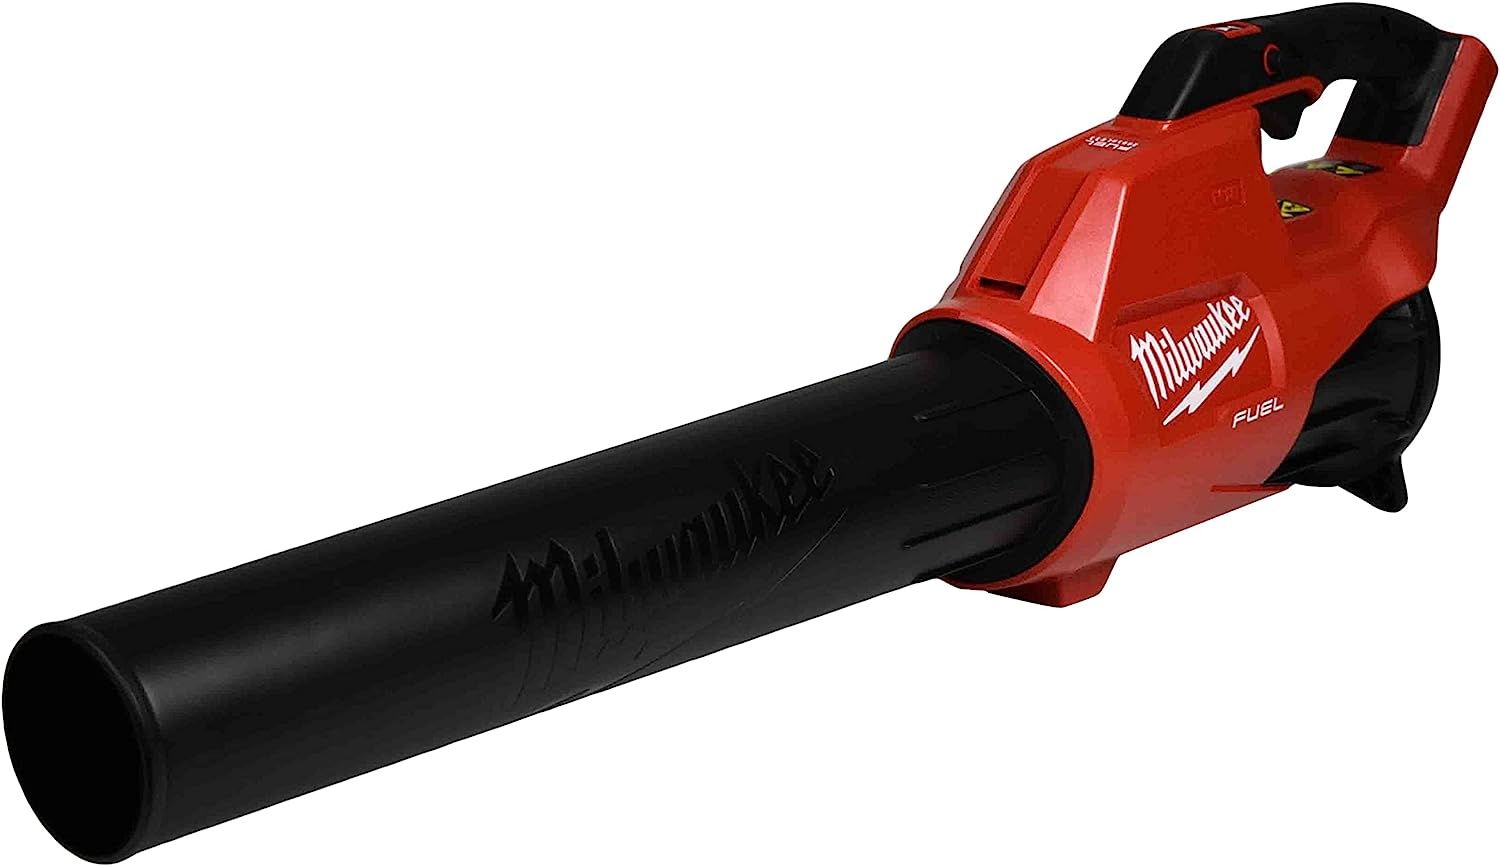 M18 Cordless Handheld Blower Kit with 8.0 Ah Battery, Rapid Charger (Slightly Used) - $230